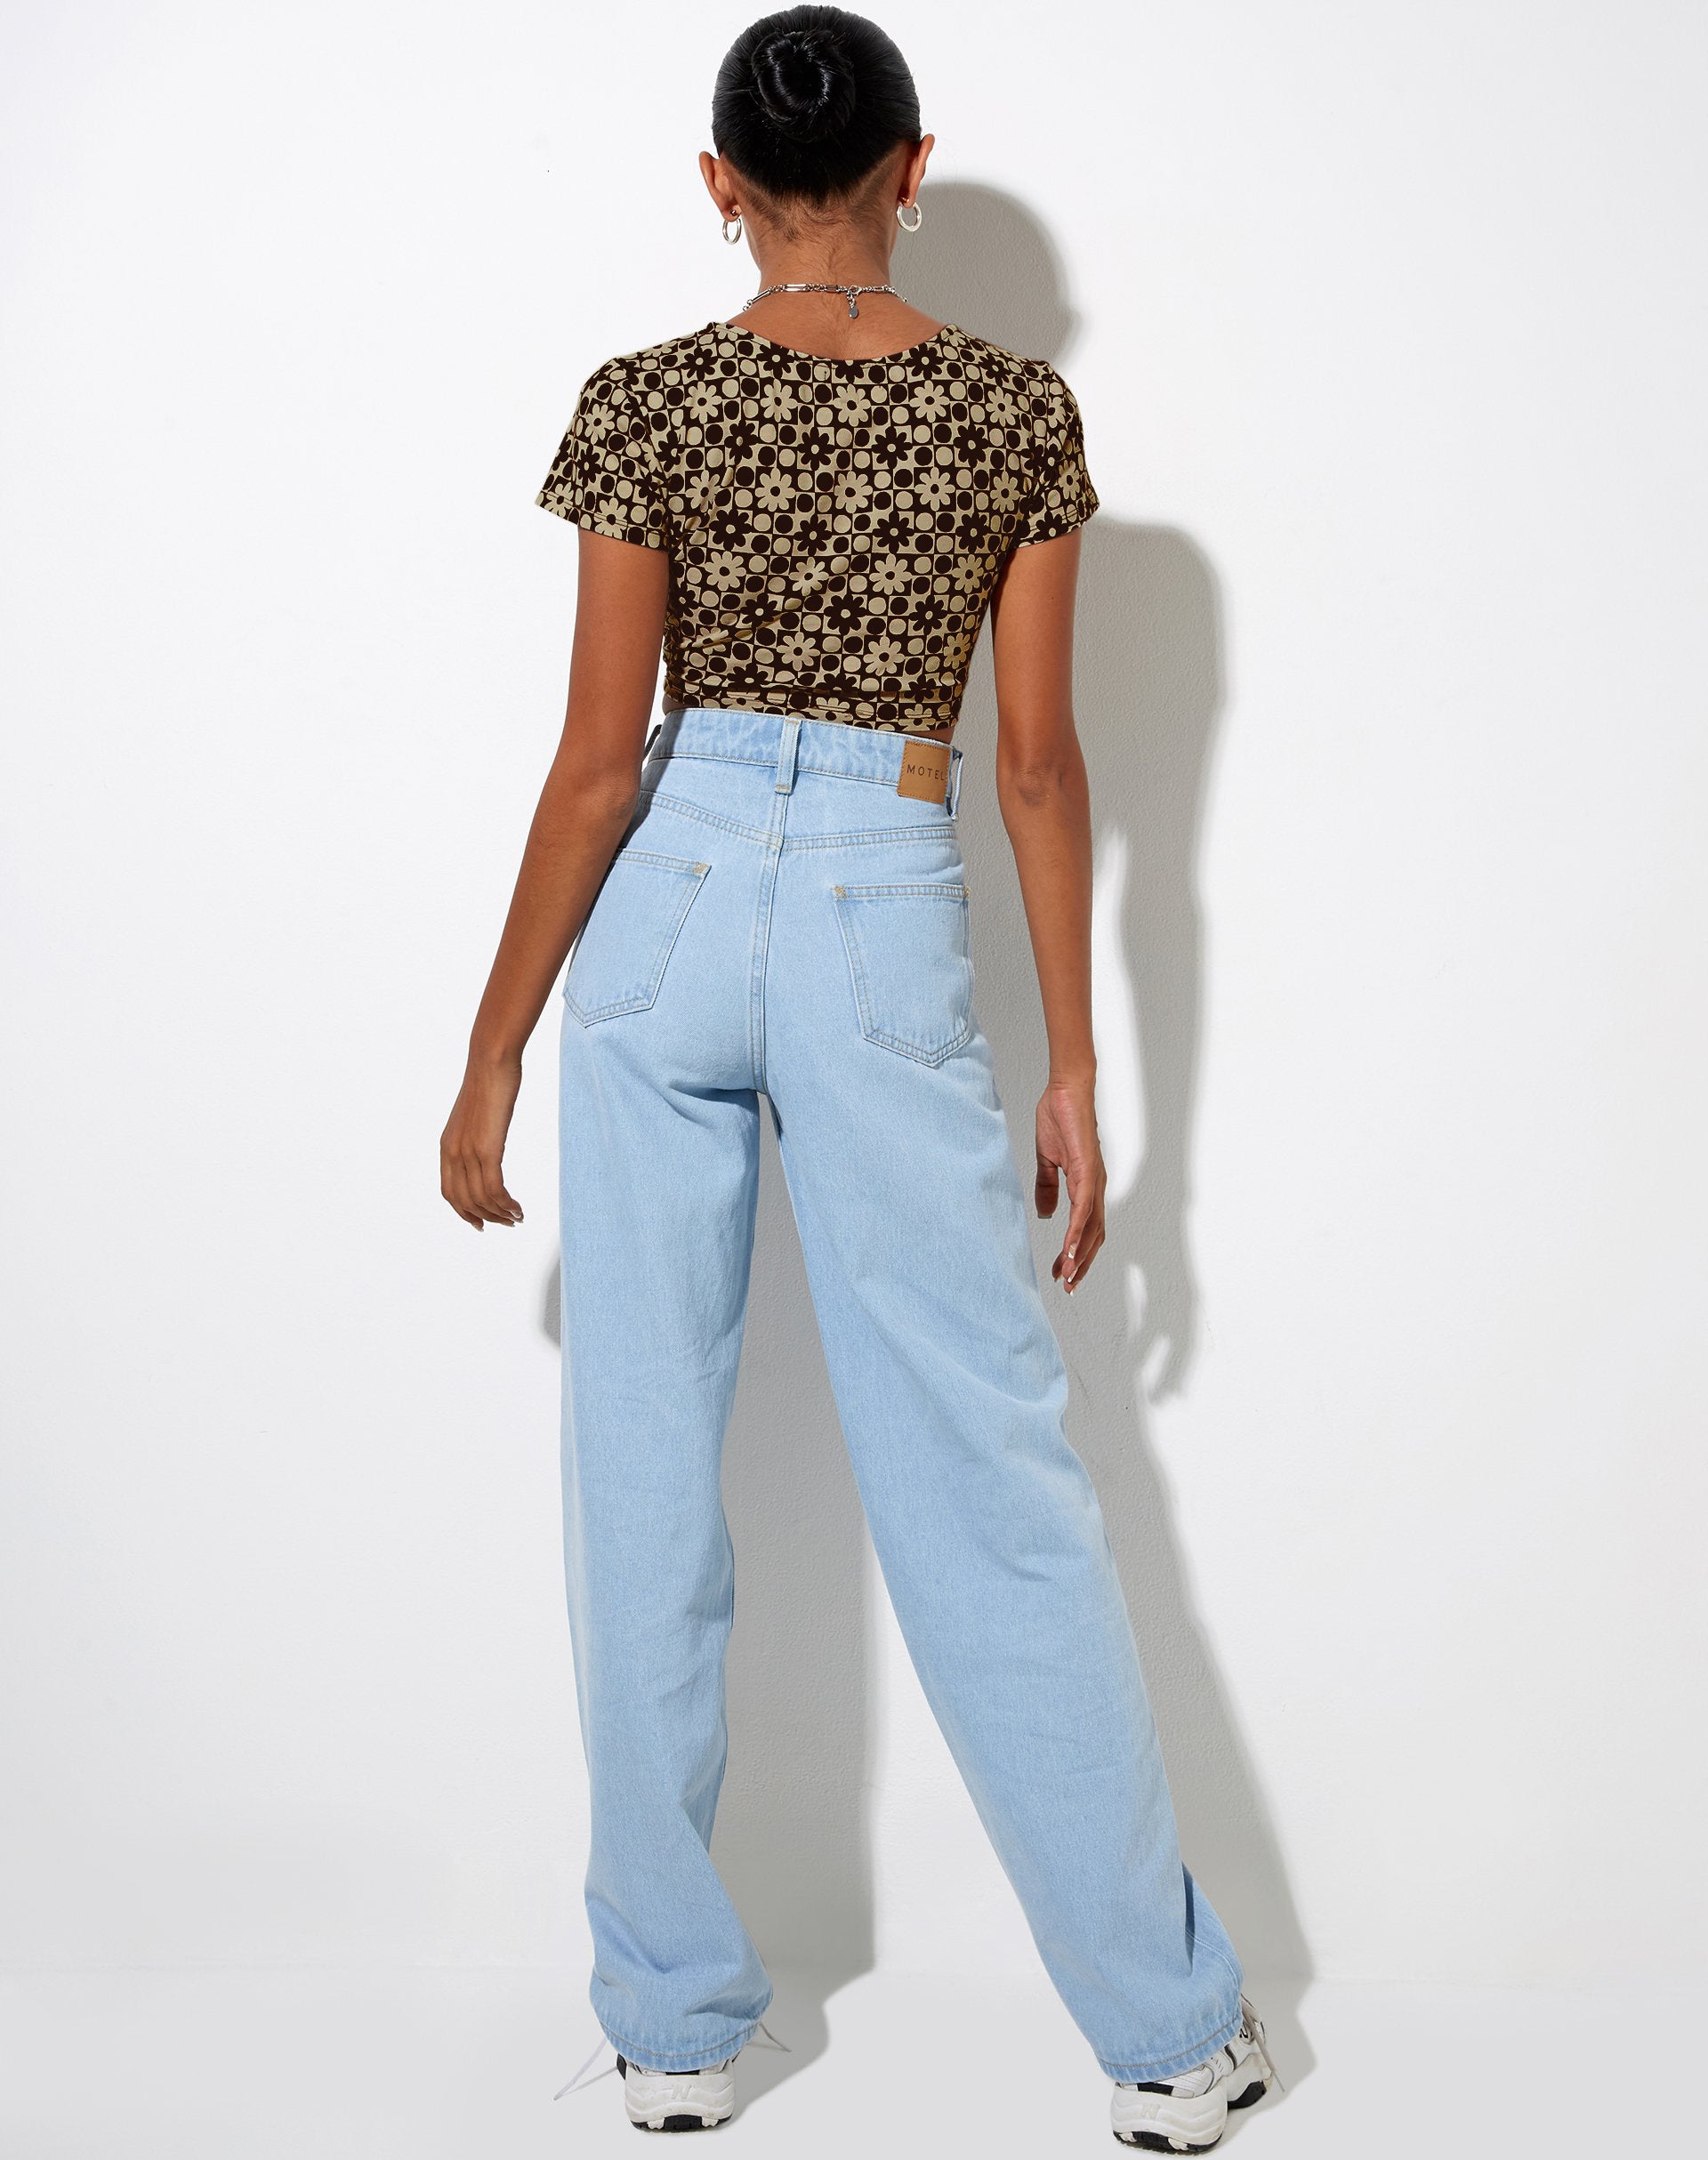 Image of Tindy Crop Top in Patchwork Daisy Brown